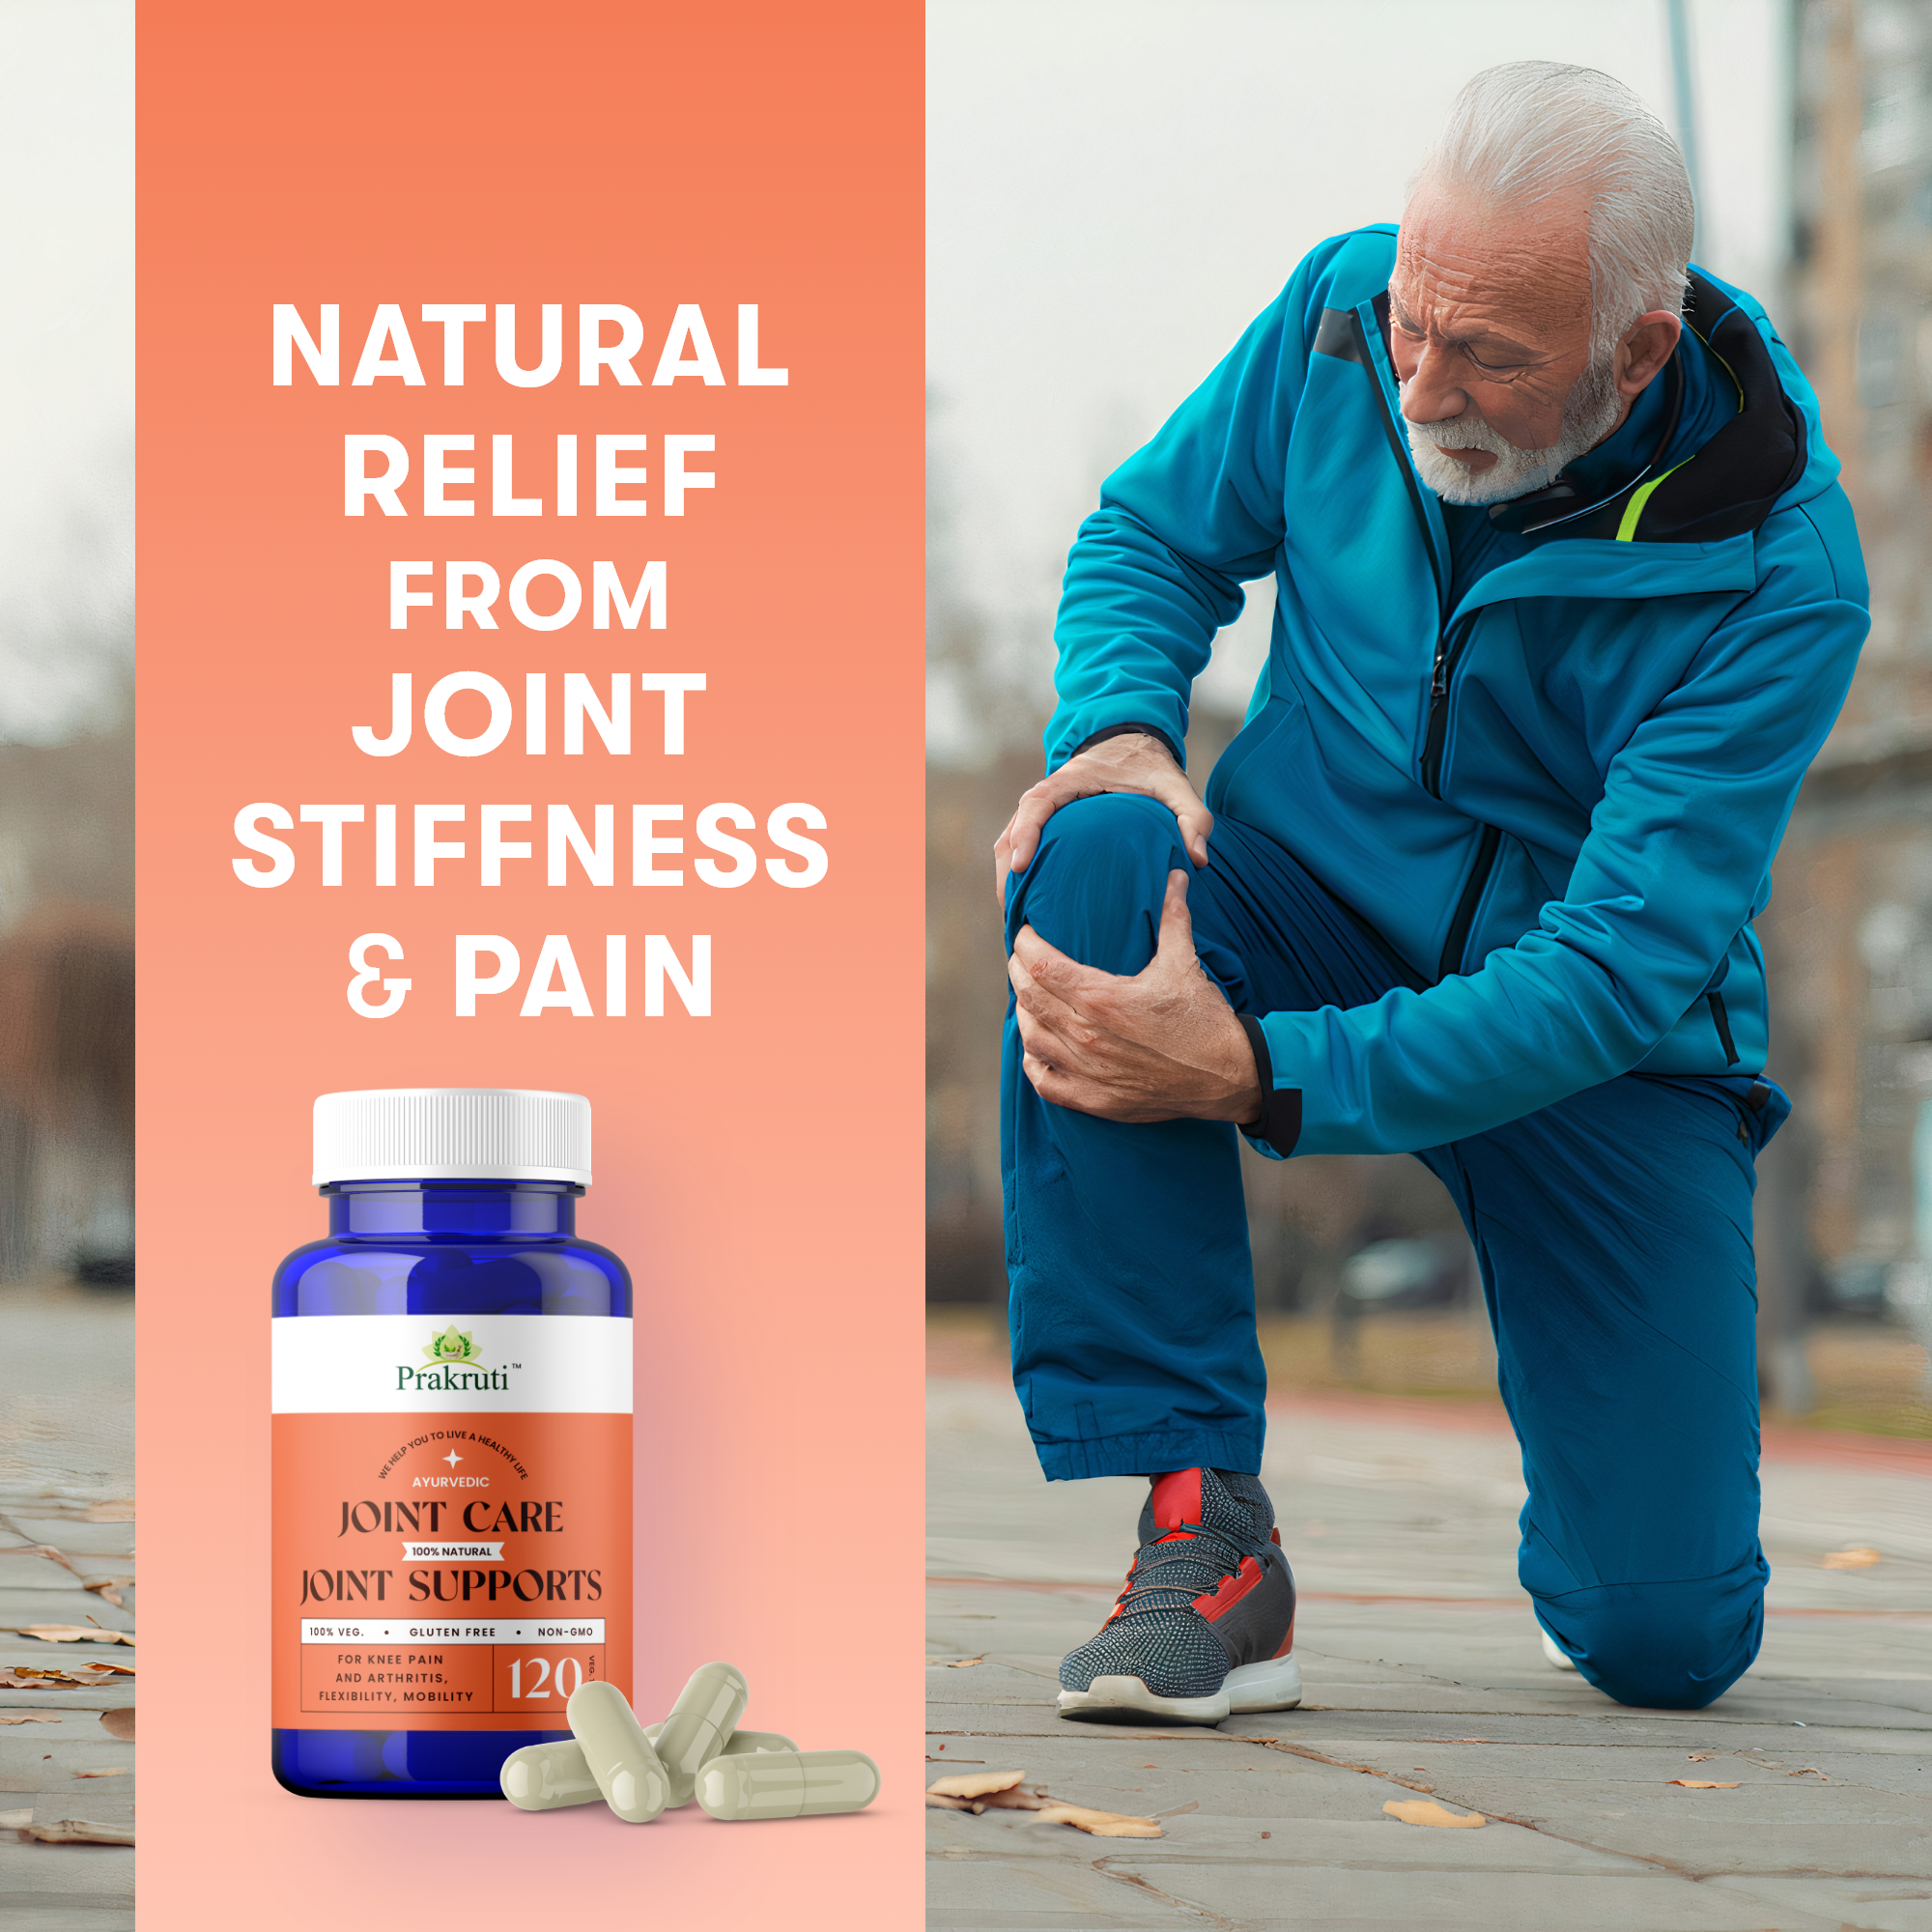 Joint Care For Knee and Joint Health | 120 Capsules